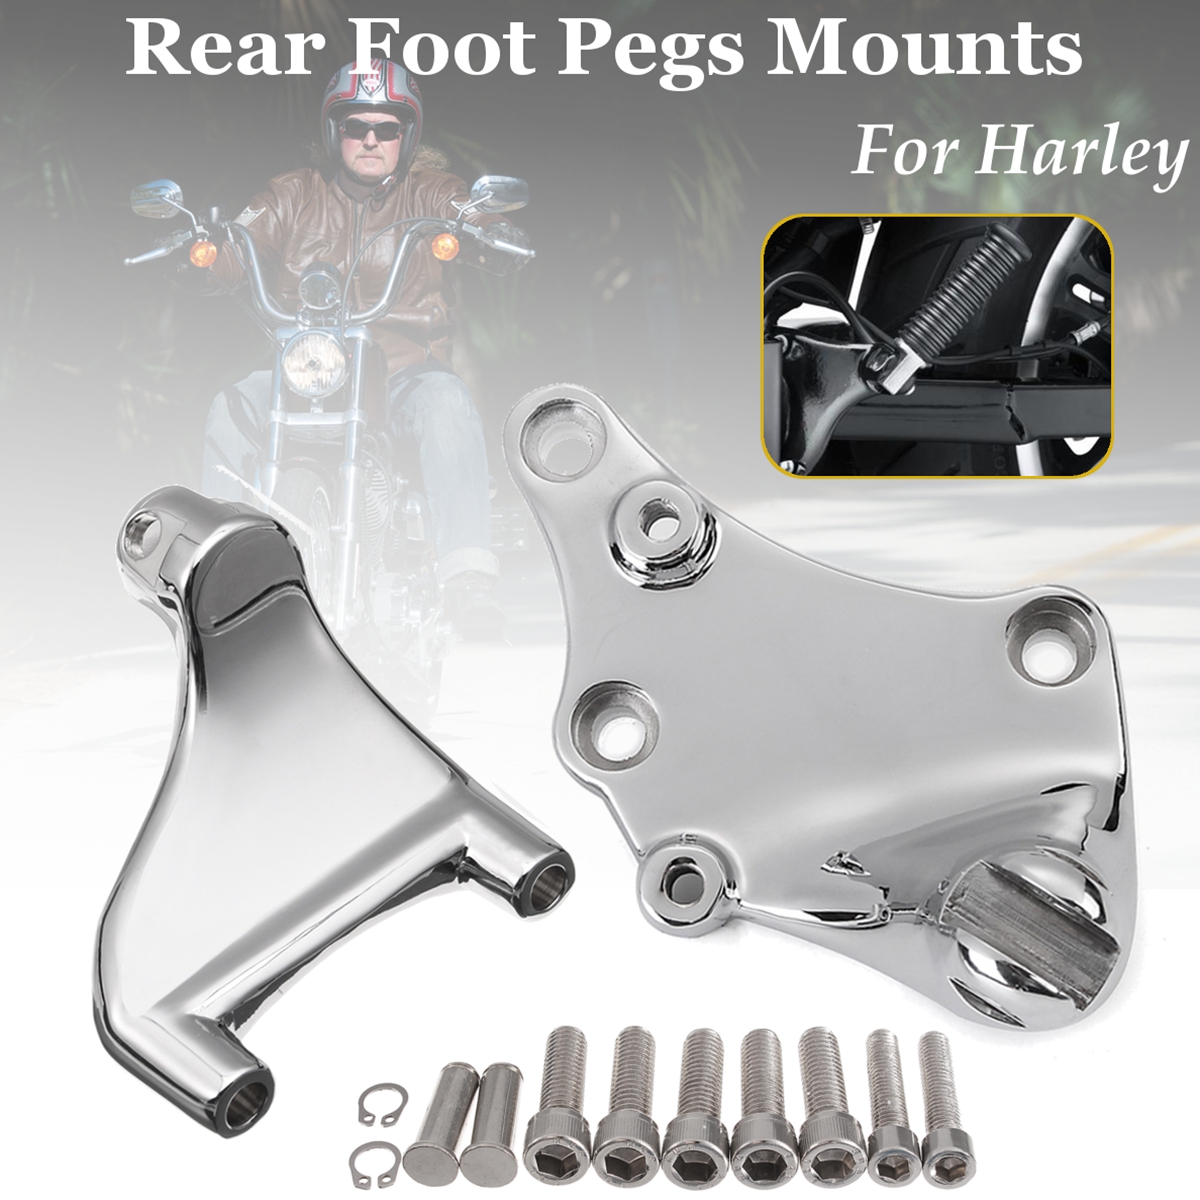 Passenger Rear Foot Pegs Mount For Harley Sportster XL 1200/883 2014-2016